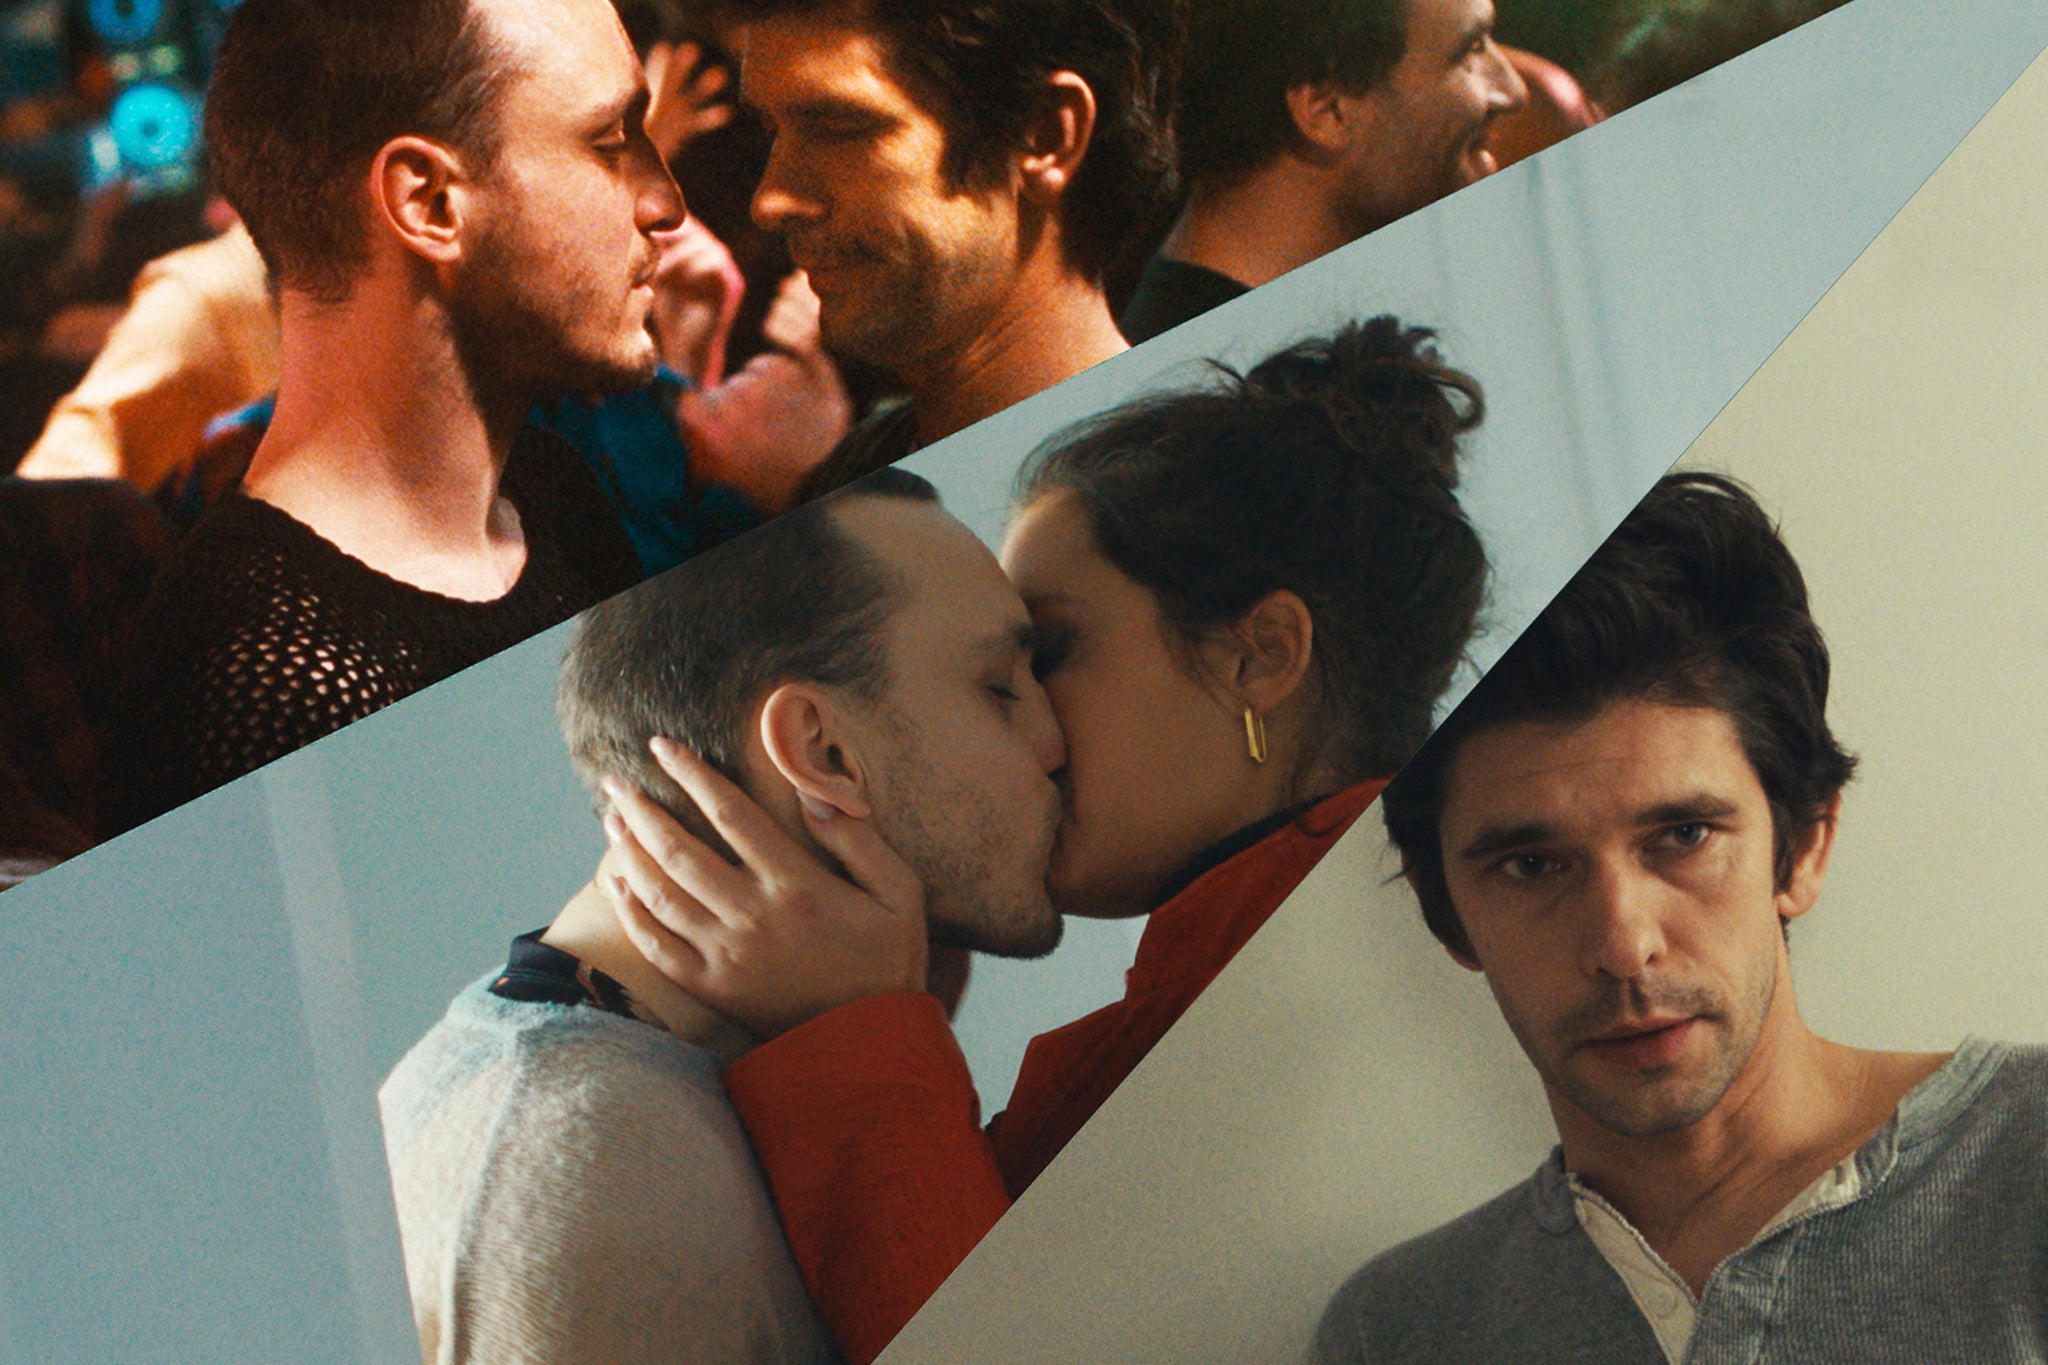 So sad, so sexy: Franz Rogowski, Ben Whishaw and Adèle Exarchopoulos make up the central love triangle of ‘Passages’